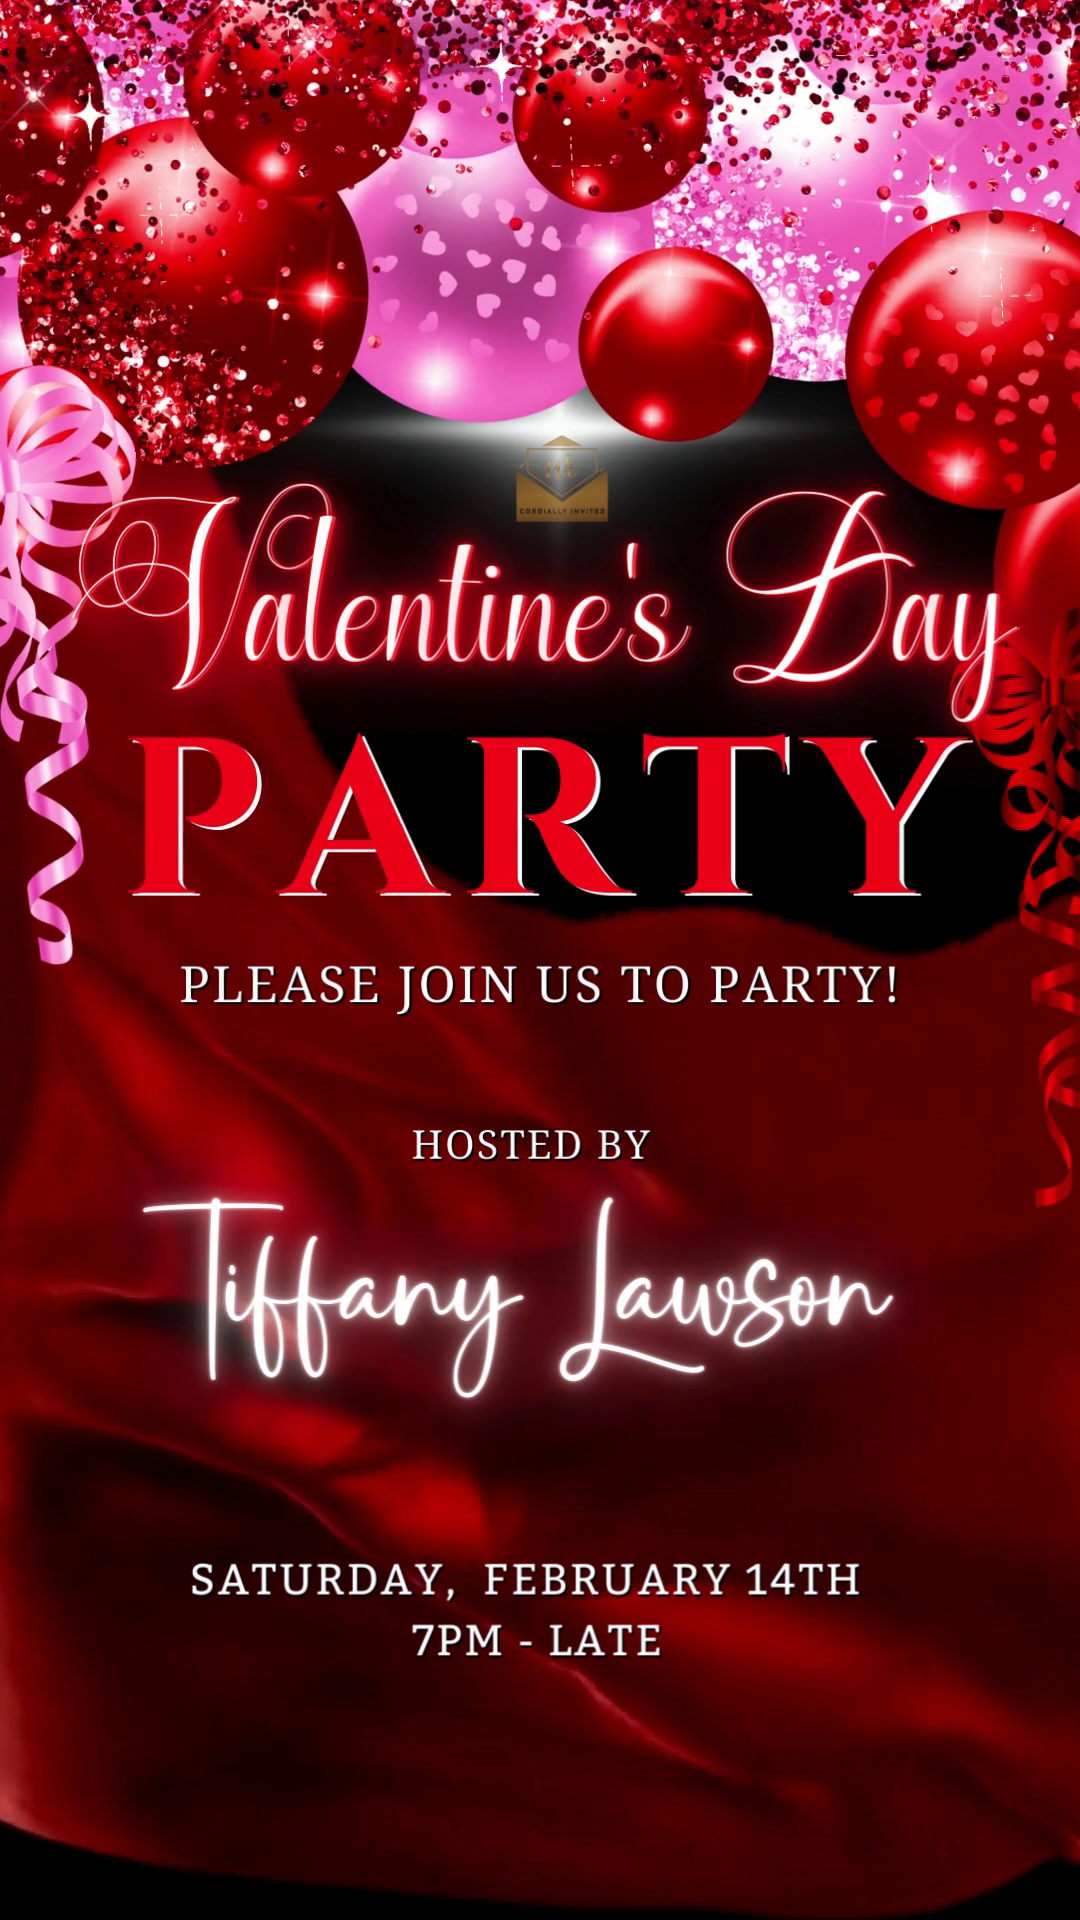 Valentine's party invite template featuring red and pink balloons with editable text, ideal for customization and digital sharing via Canva.